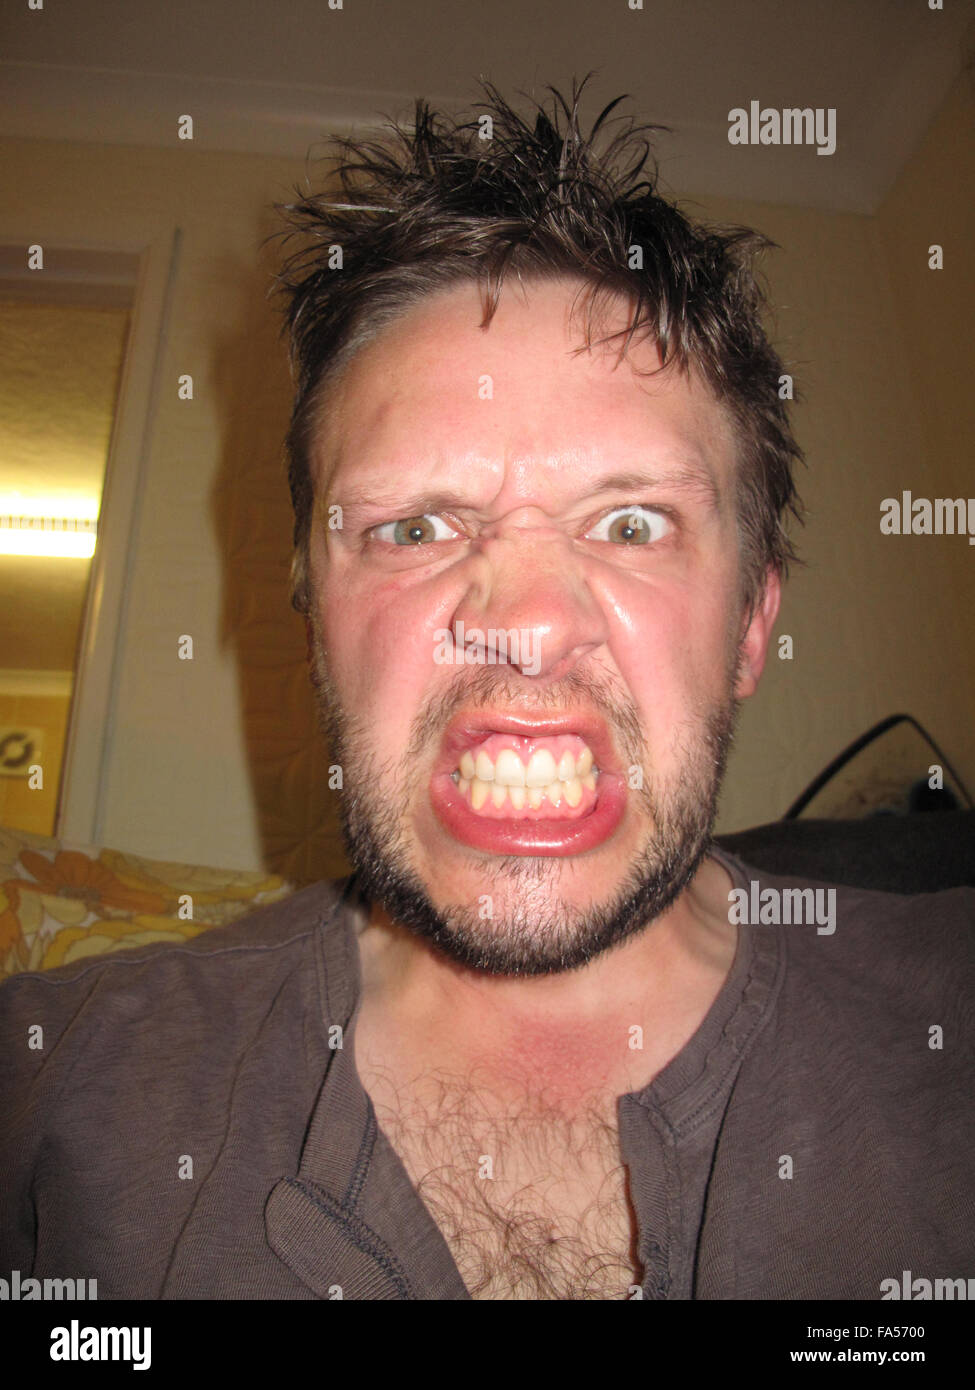 An angry face of a man bearing his teeth Stock Photo - Alamy